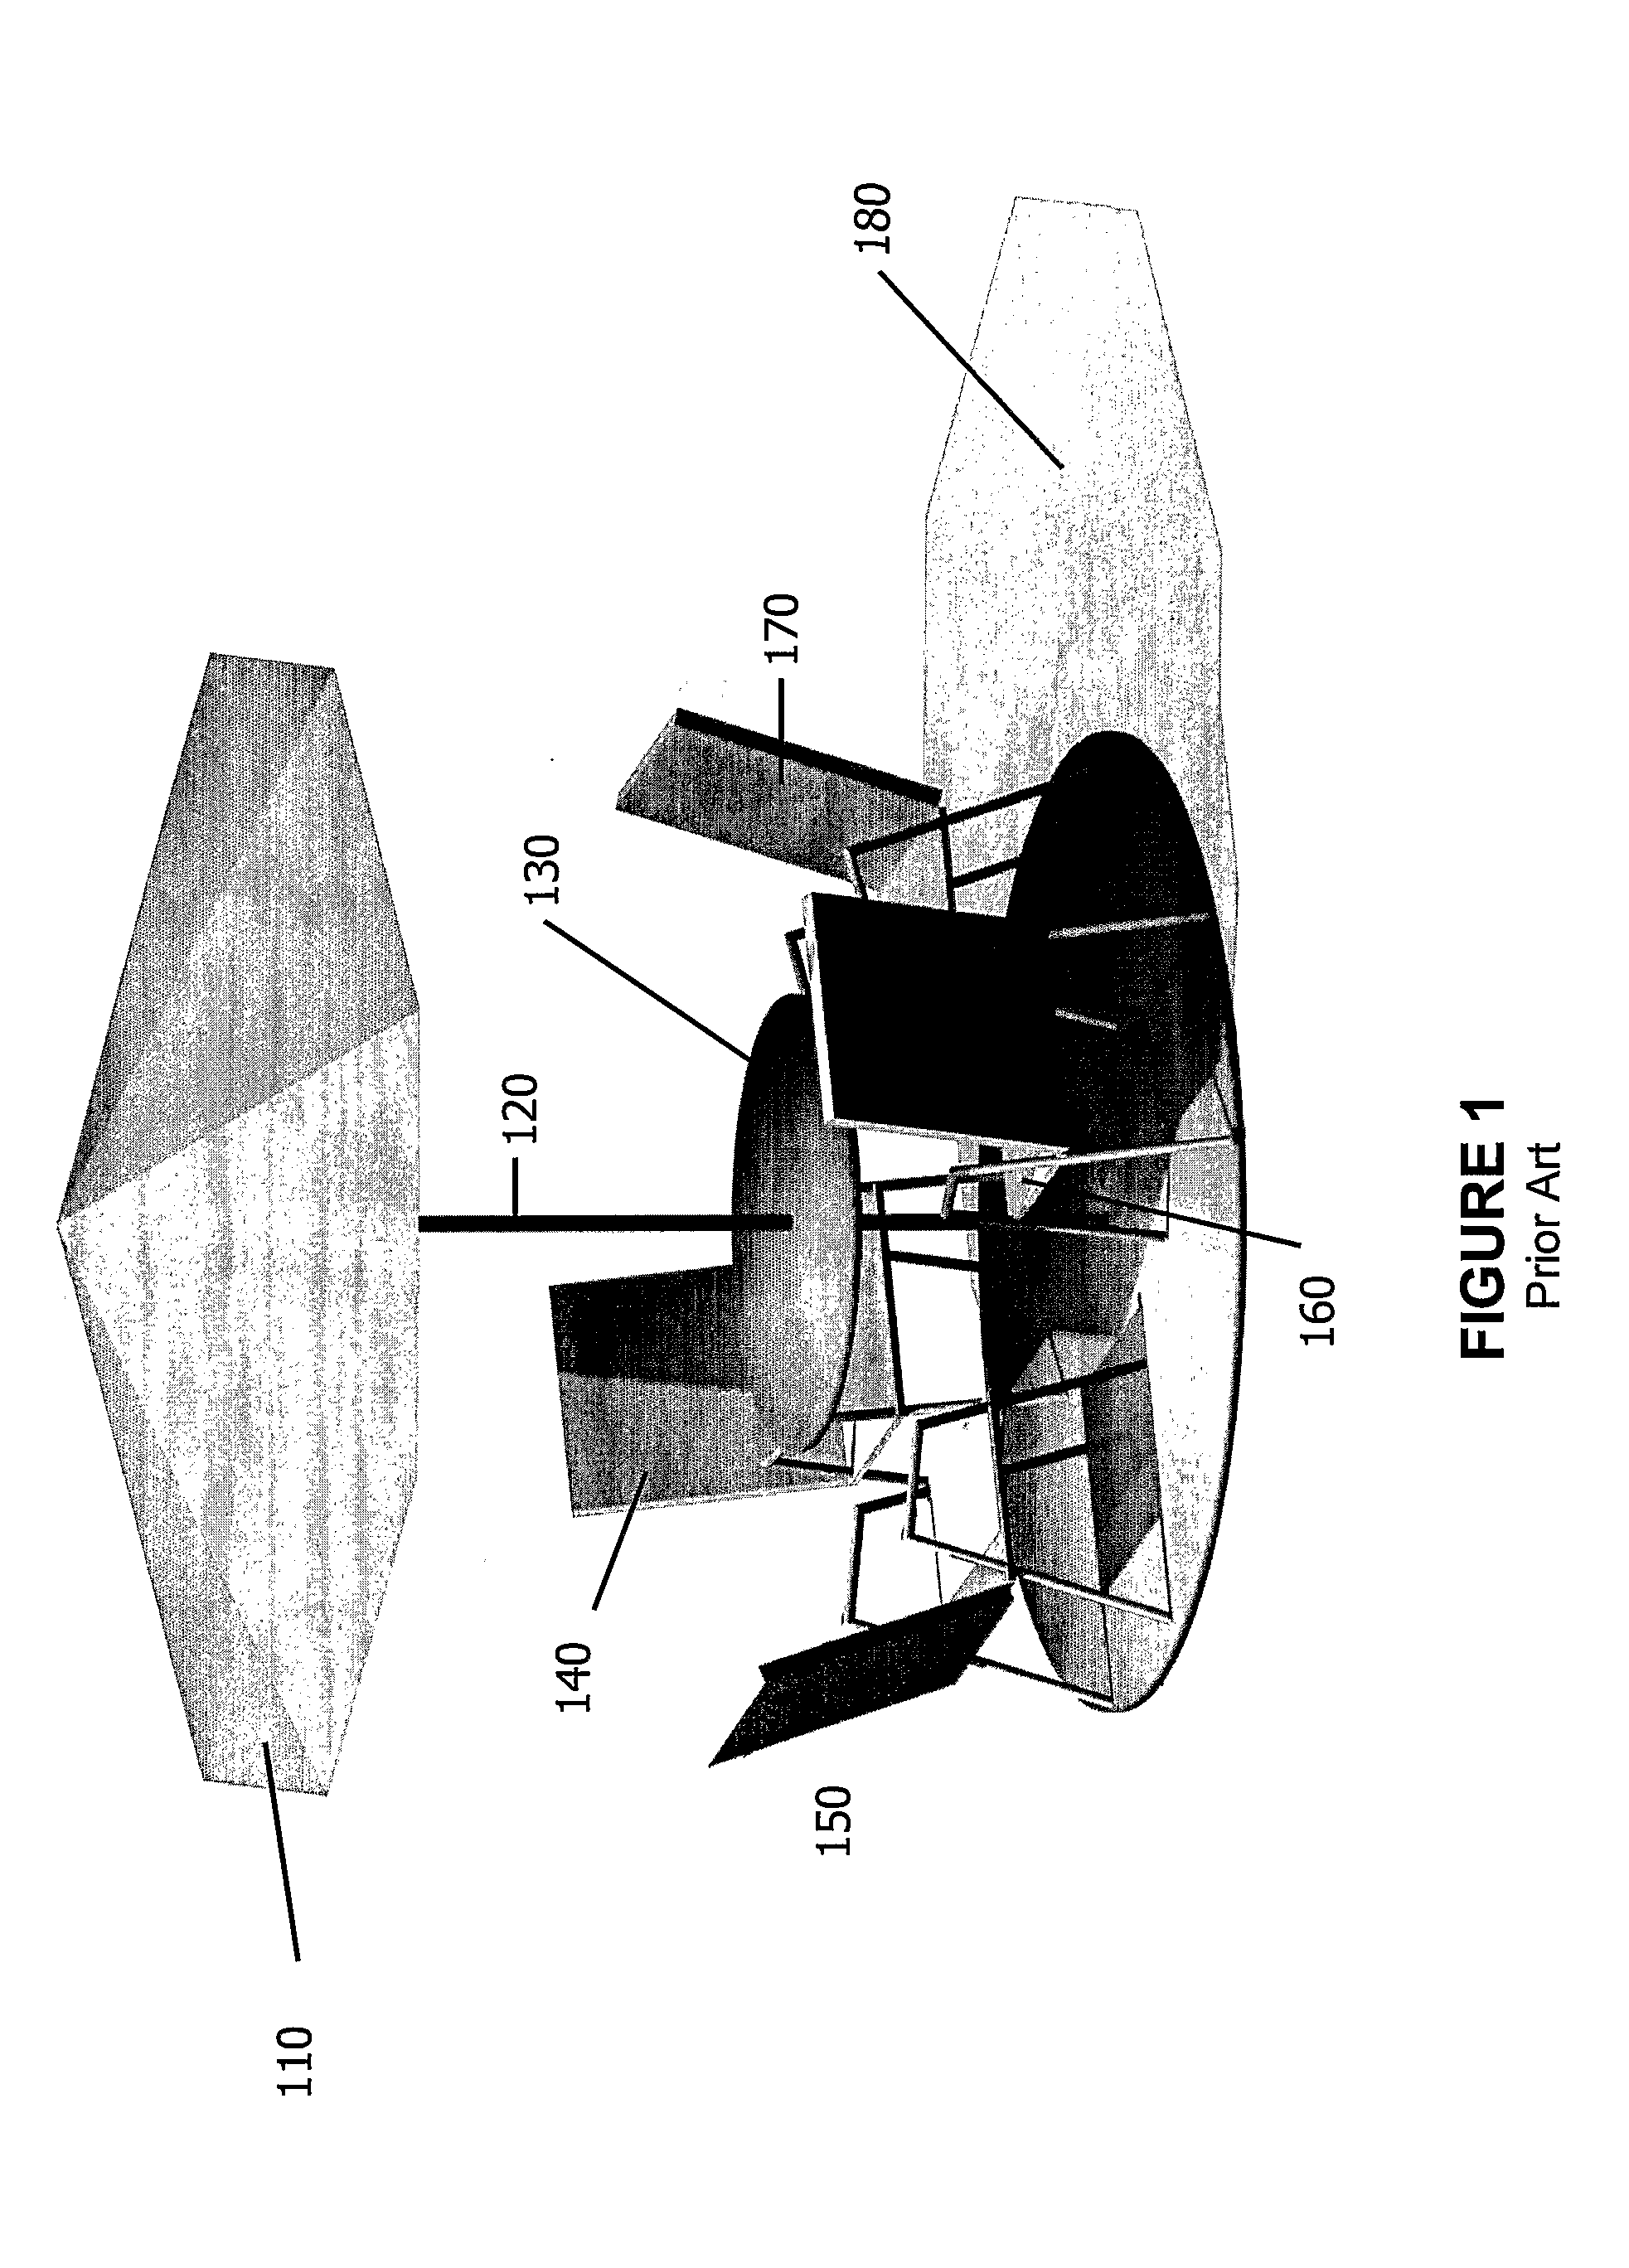 Canopy for a stationary covering device having an asymmetrical shape